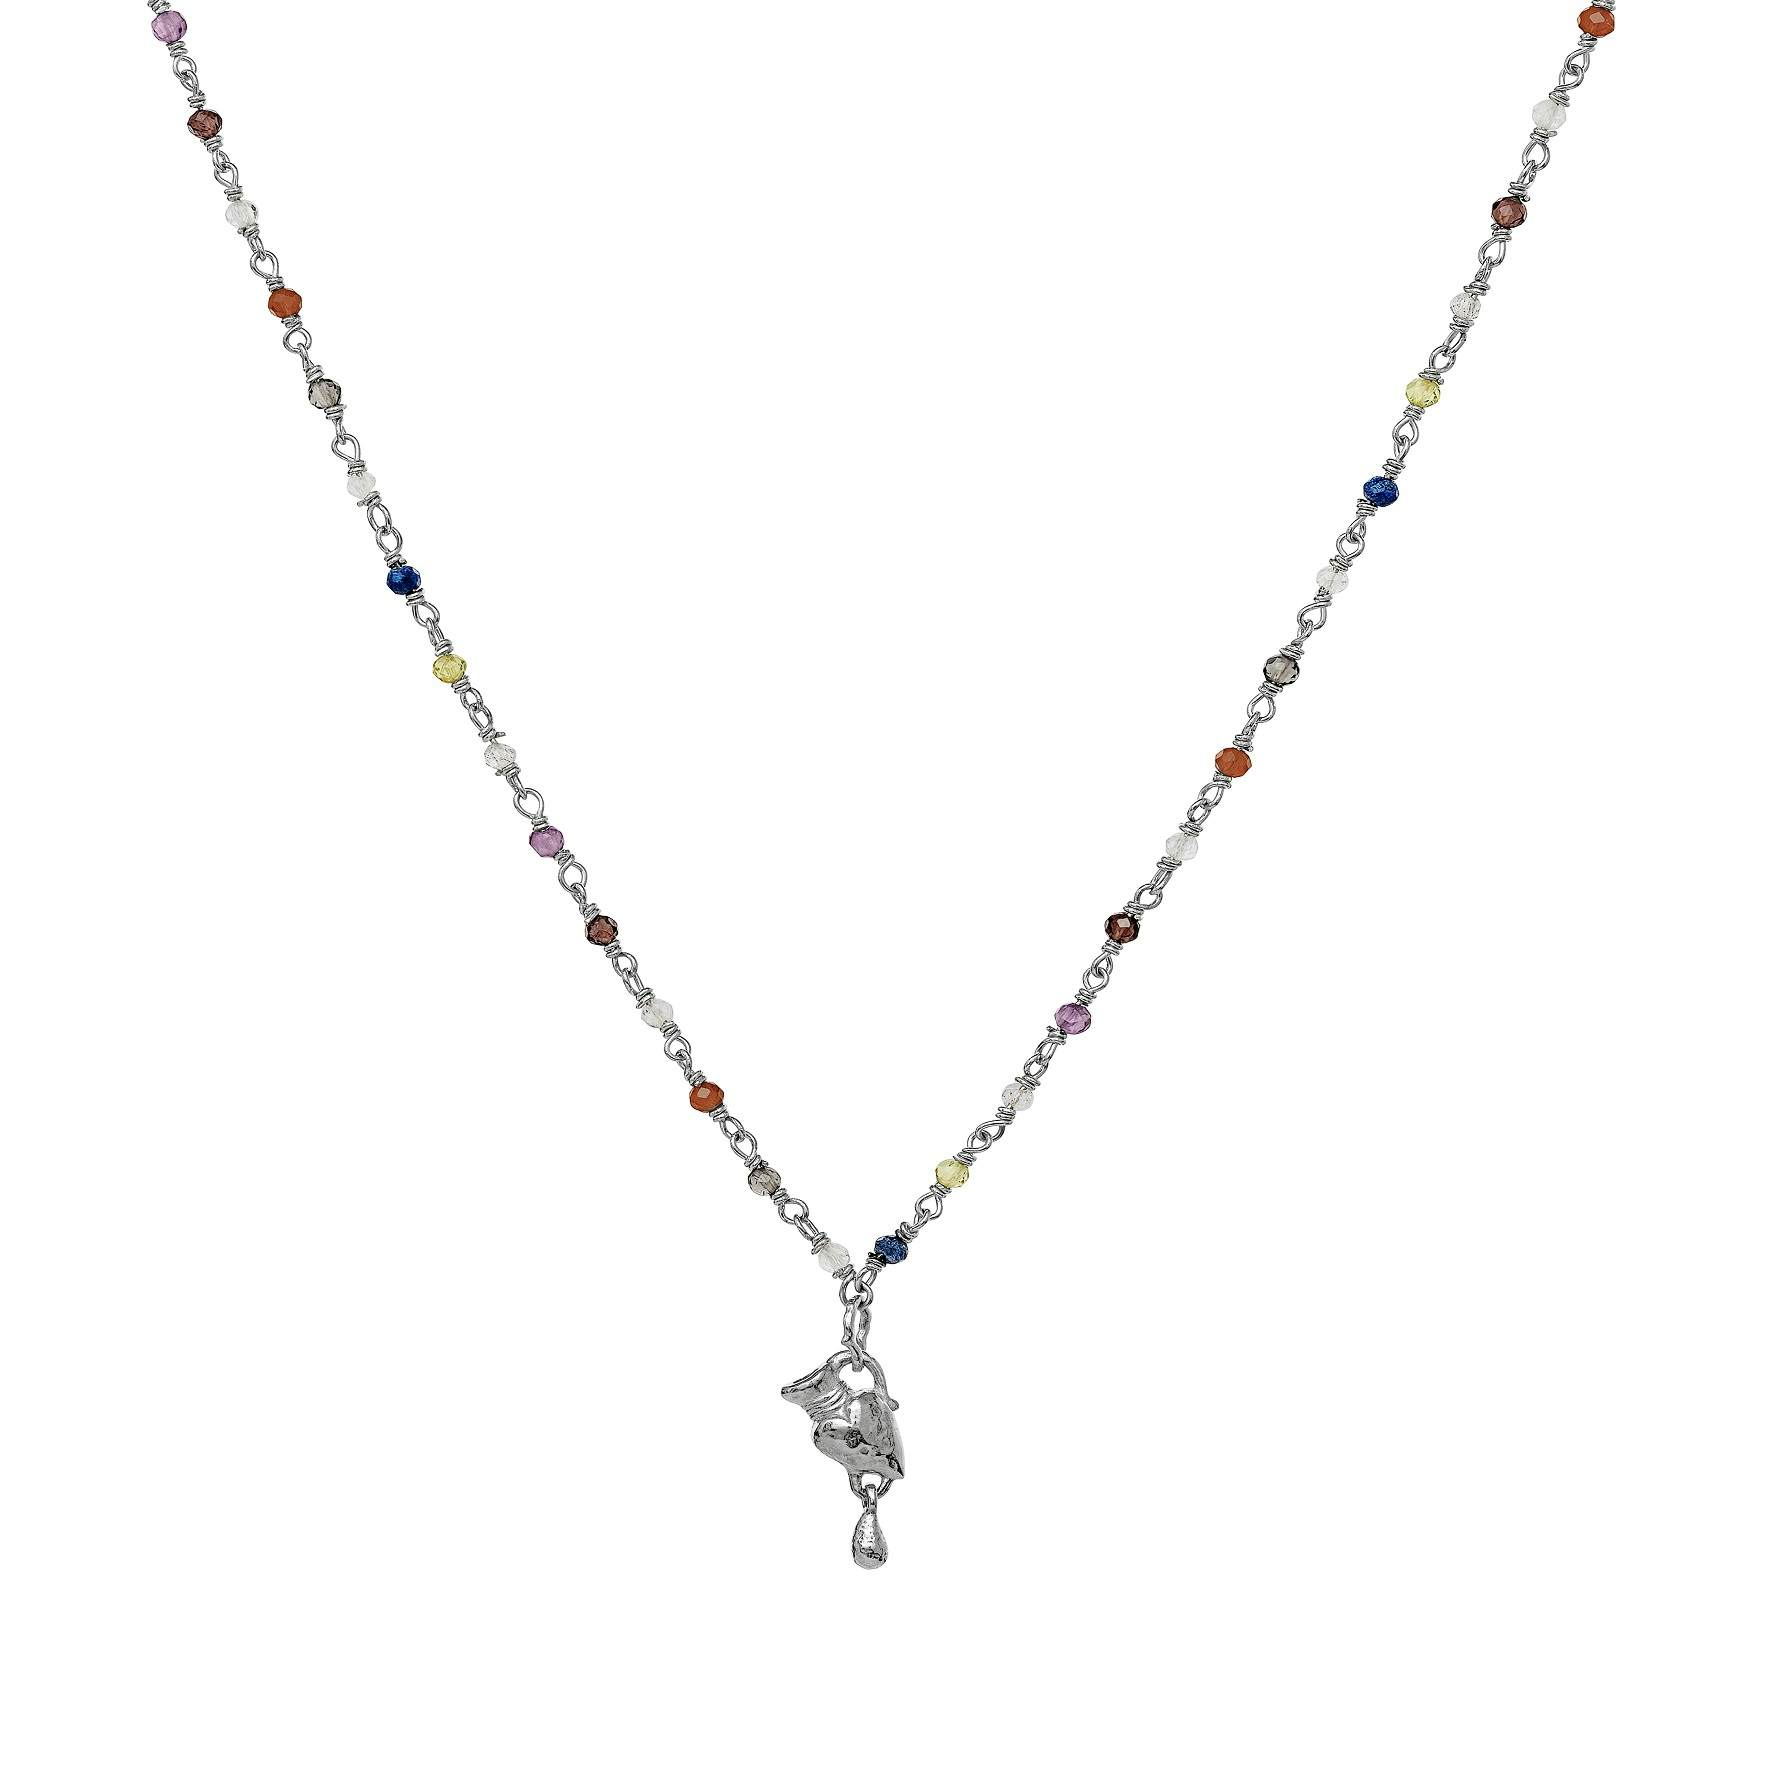 Aphrodite Necklace from Maanesten in Silver Sterling 925